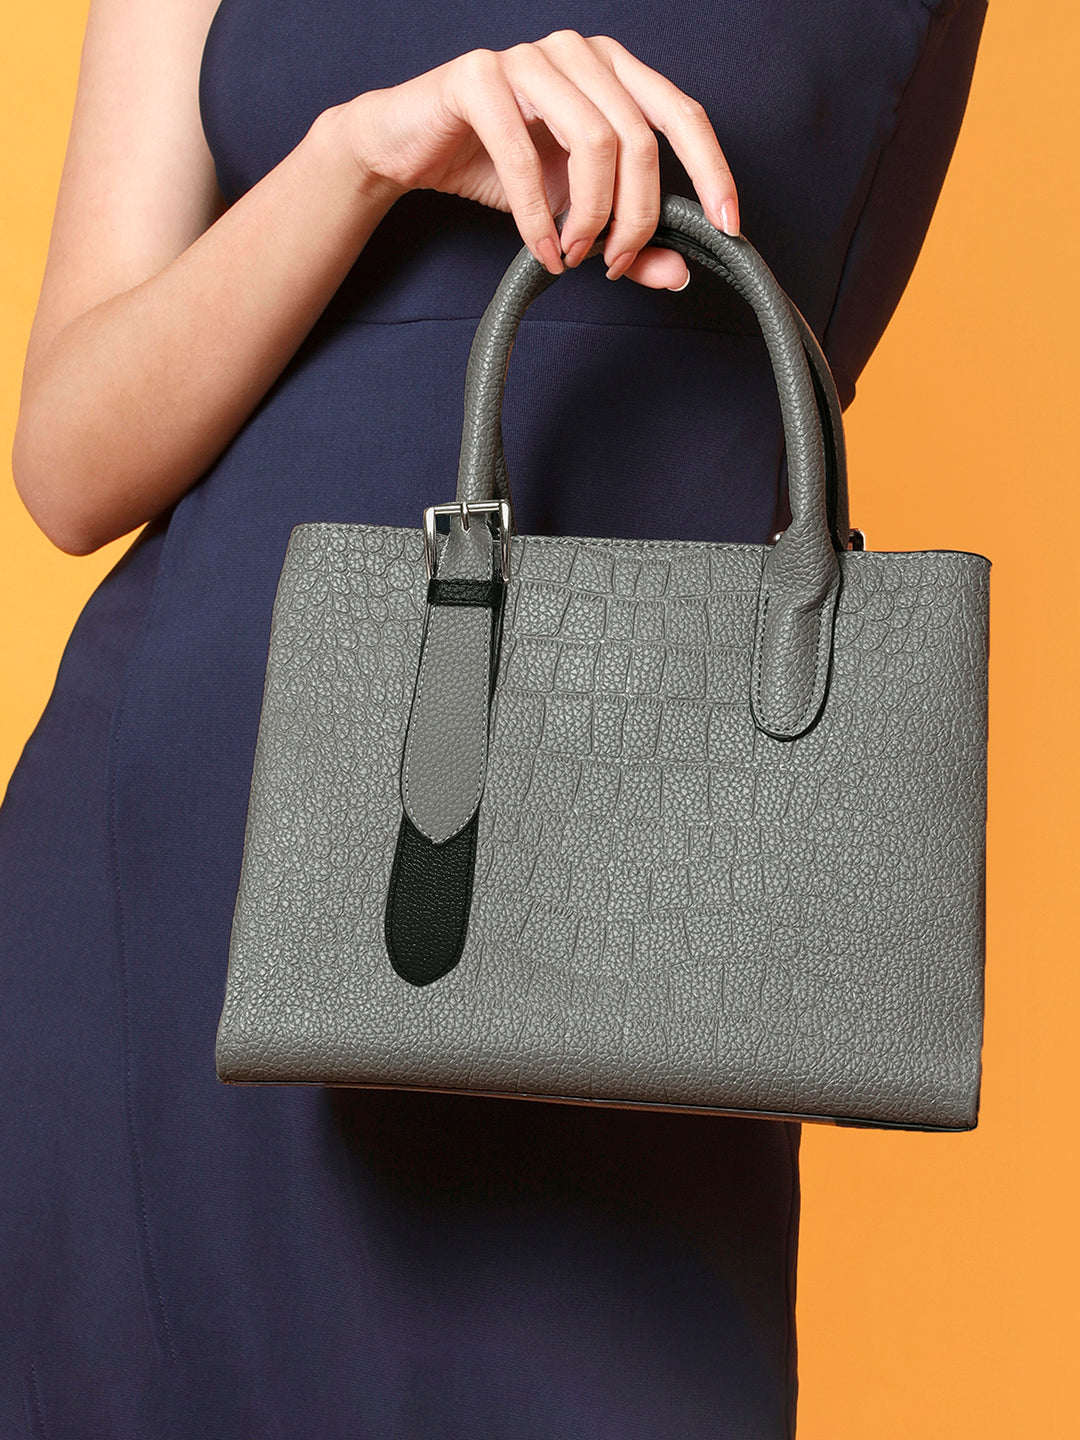 Stormy Structure Grey Tote Bag